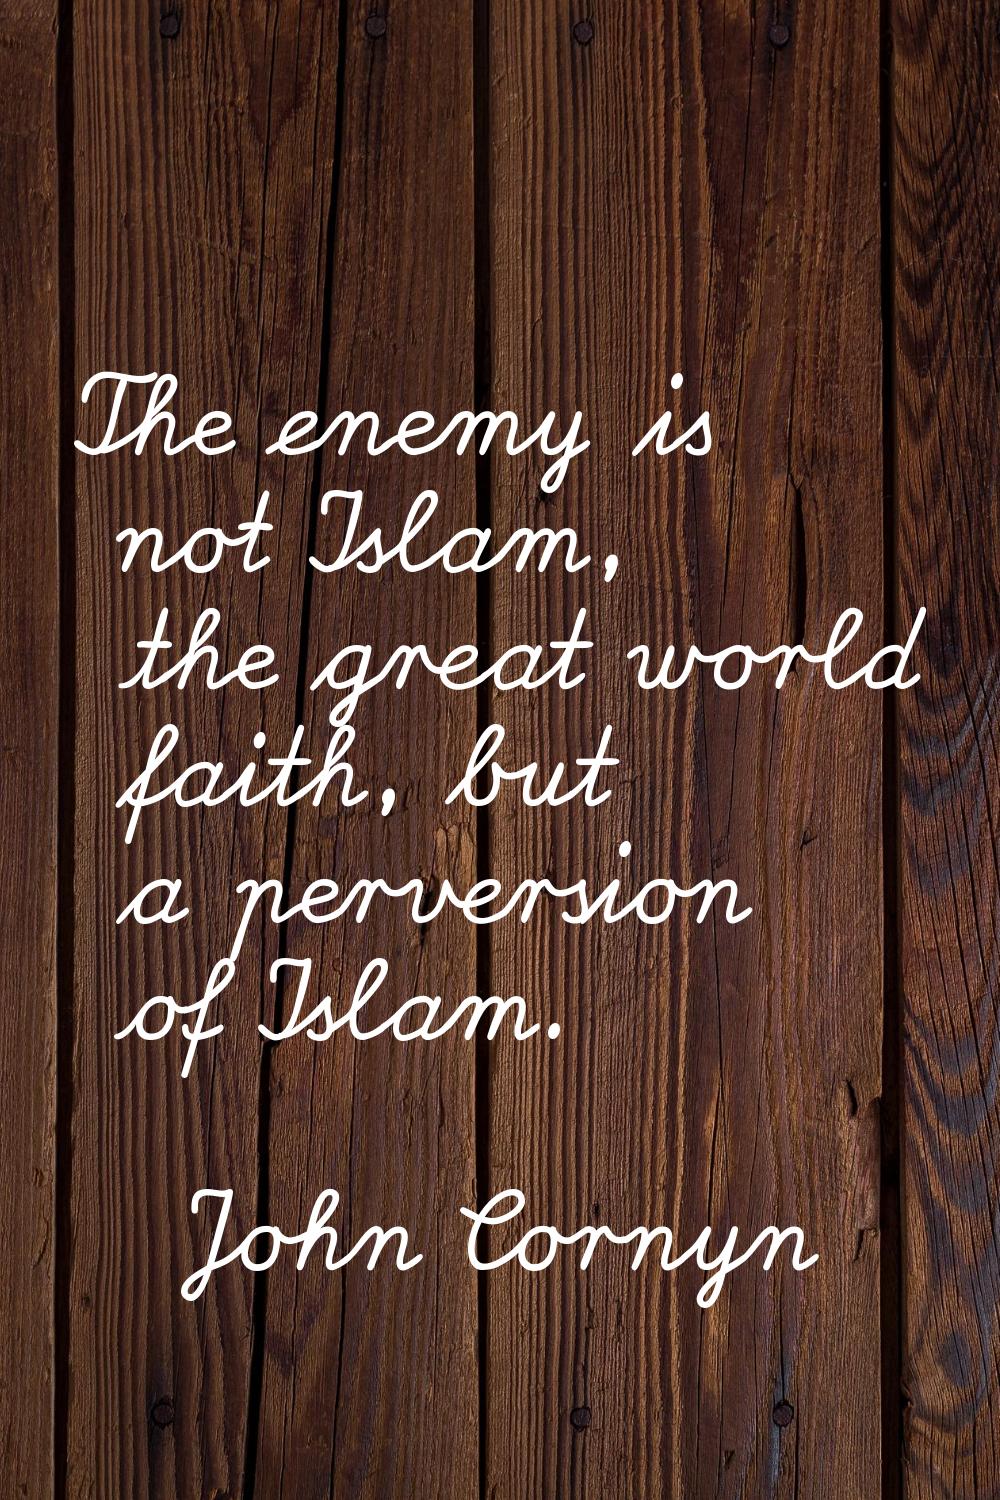 The enemy is not Islam, the great world faith, but a perversion of Islam.